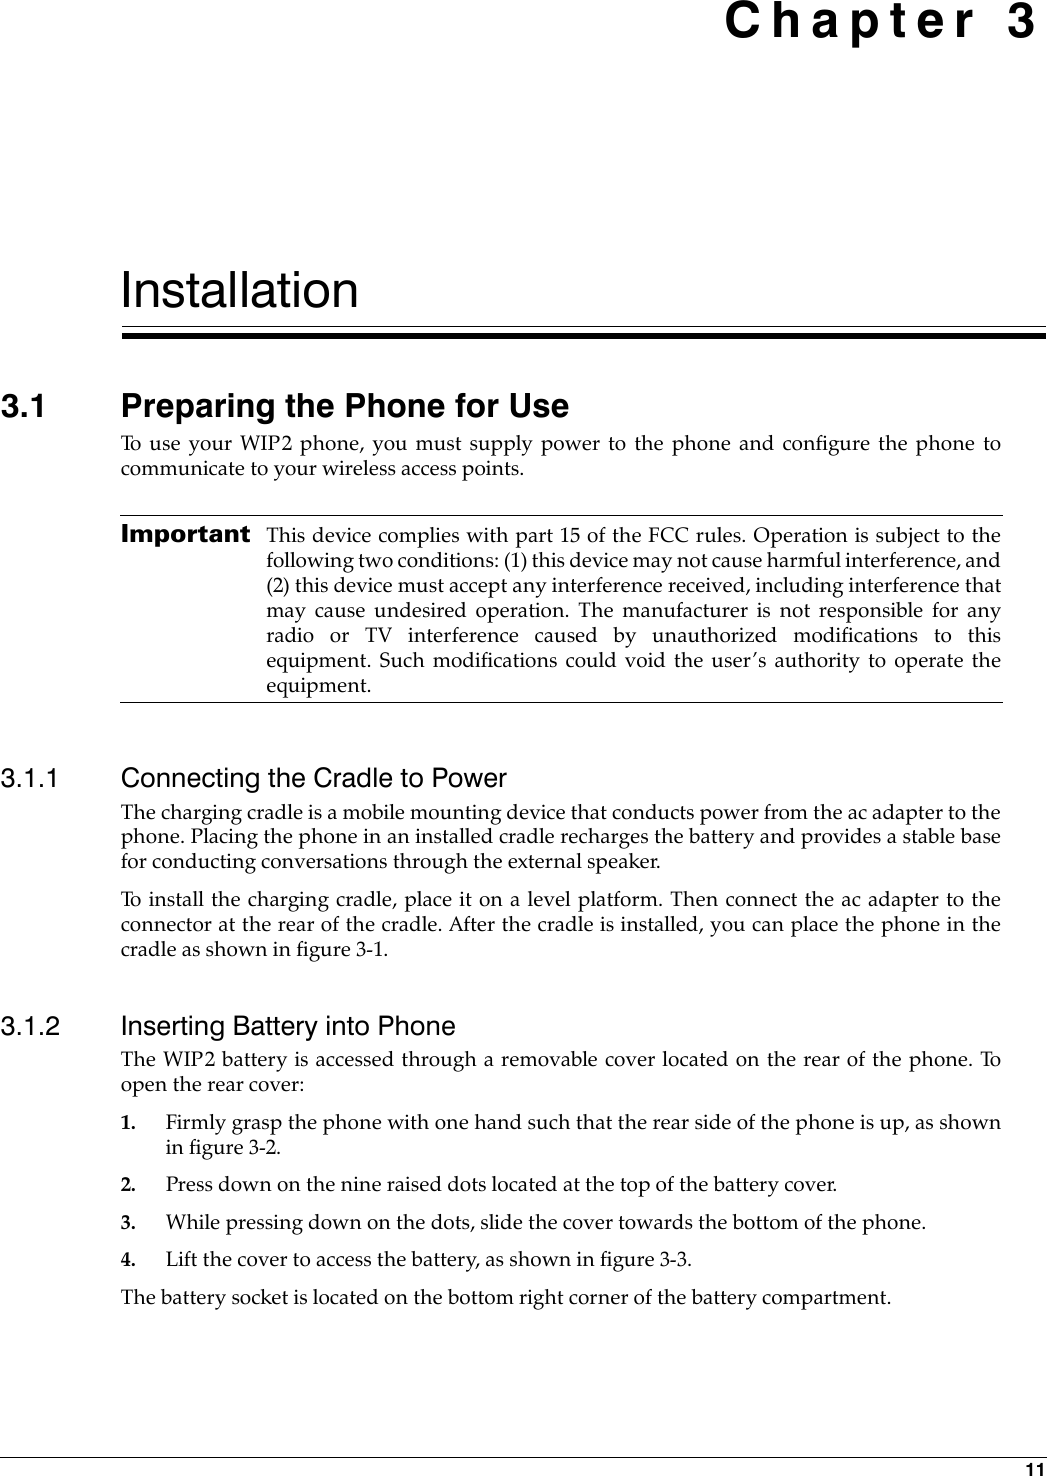 11 Chapter 3Installation3.1 Preparing the Phone for UseTo use your WIP2 phone, you must supply power to the phone and configure the phone tocommunicate to your wireless access points. Important This device complies with part 15 of the FCC rules. Operation is subject to thefollowing two conditions: (1) this device may not cause harmful interference, and(2) this device must accept any interference received, including interference thatmay cause undesired operation. The manufacturer is not responsible for anyradio or TV interference caused by unauthorized modifications to thisequipment. Such modifications could void the user’s authority to operate theequipment.3.1.1 Connecting the Cradle to PowerThe charging cradle is a mobile mounting device that conducts power from the ac adapter to thephone. Placing the phone in an installed cradle recharges the battery and provides a stable basefor conducting conversations through the external speaker.To install the charging cradle, place it on a level platform. Then connect the ac adapter to theconnector at the rear of the cradle. After the cradle is installed, you can place the phone in thecradle as shown in figure 3-1.3.1.2 Inserting Battery into PhoneThe WIP2 battery is accessed through a removable cover located on the rear of the phone. Toopen the rear cover:1. Firmly grasp the phone with one hand such that the rear side of the phone is up, as shownin figure 3-2.2. Press down on the nine raised dots located at the top of the battery cover.3. While pressing down on the dots, slide the cover towards the bottom of the phone.4. Lift the cover to access the battery, as shown in figure 3-3.The battery socket is located on the bottom right corner of the battery compartment.